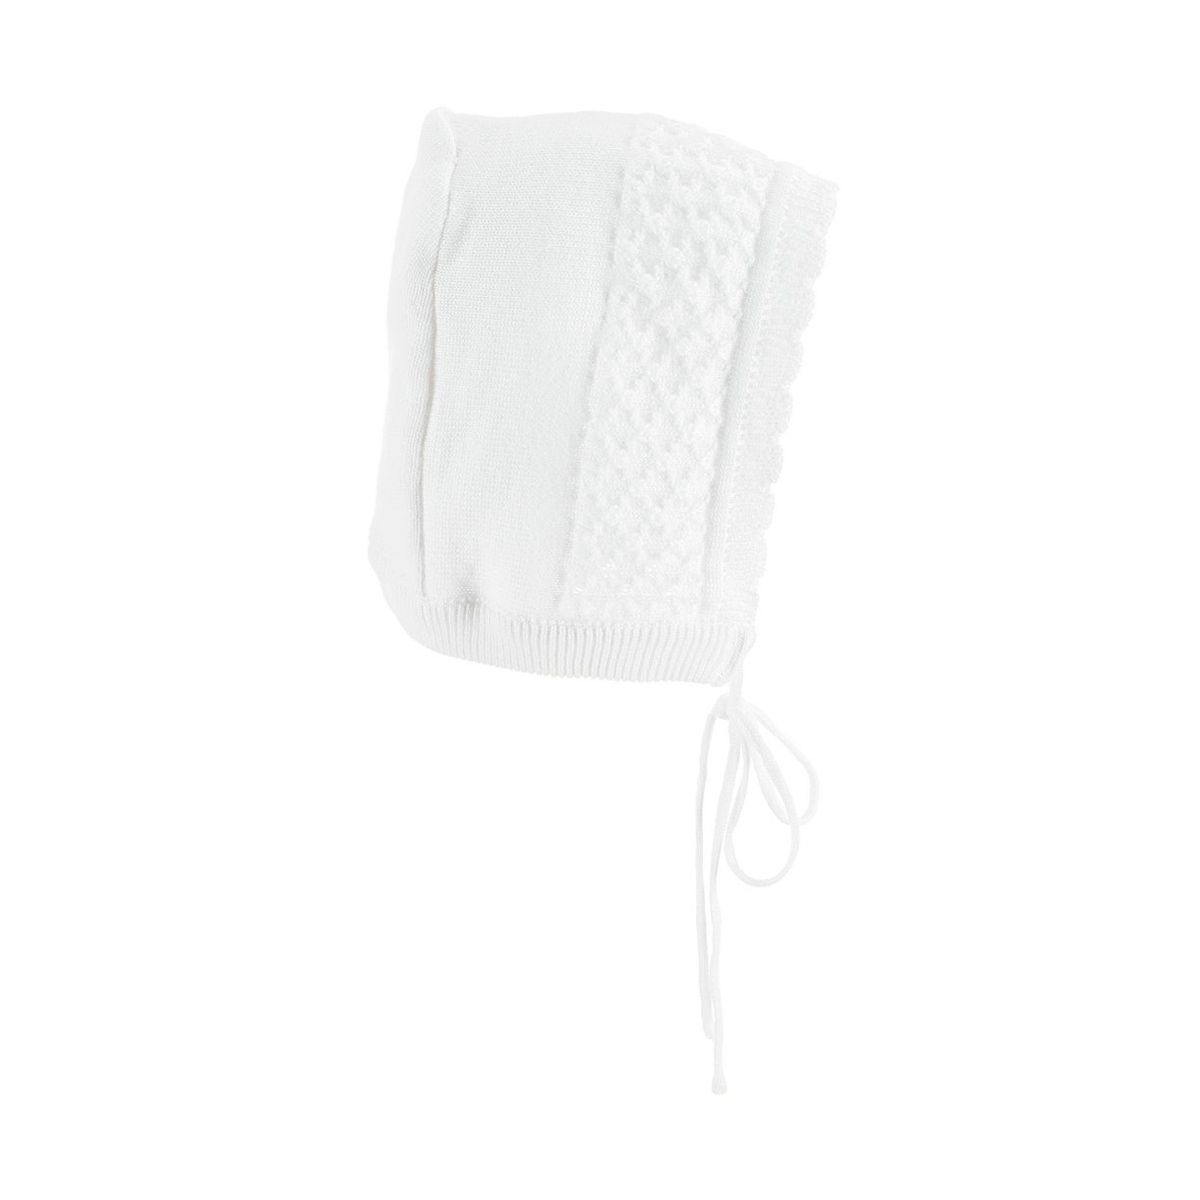 White Knit Bonnet with Scalloped Edge